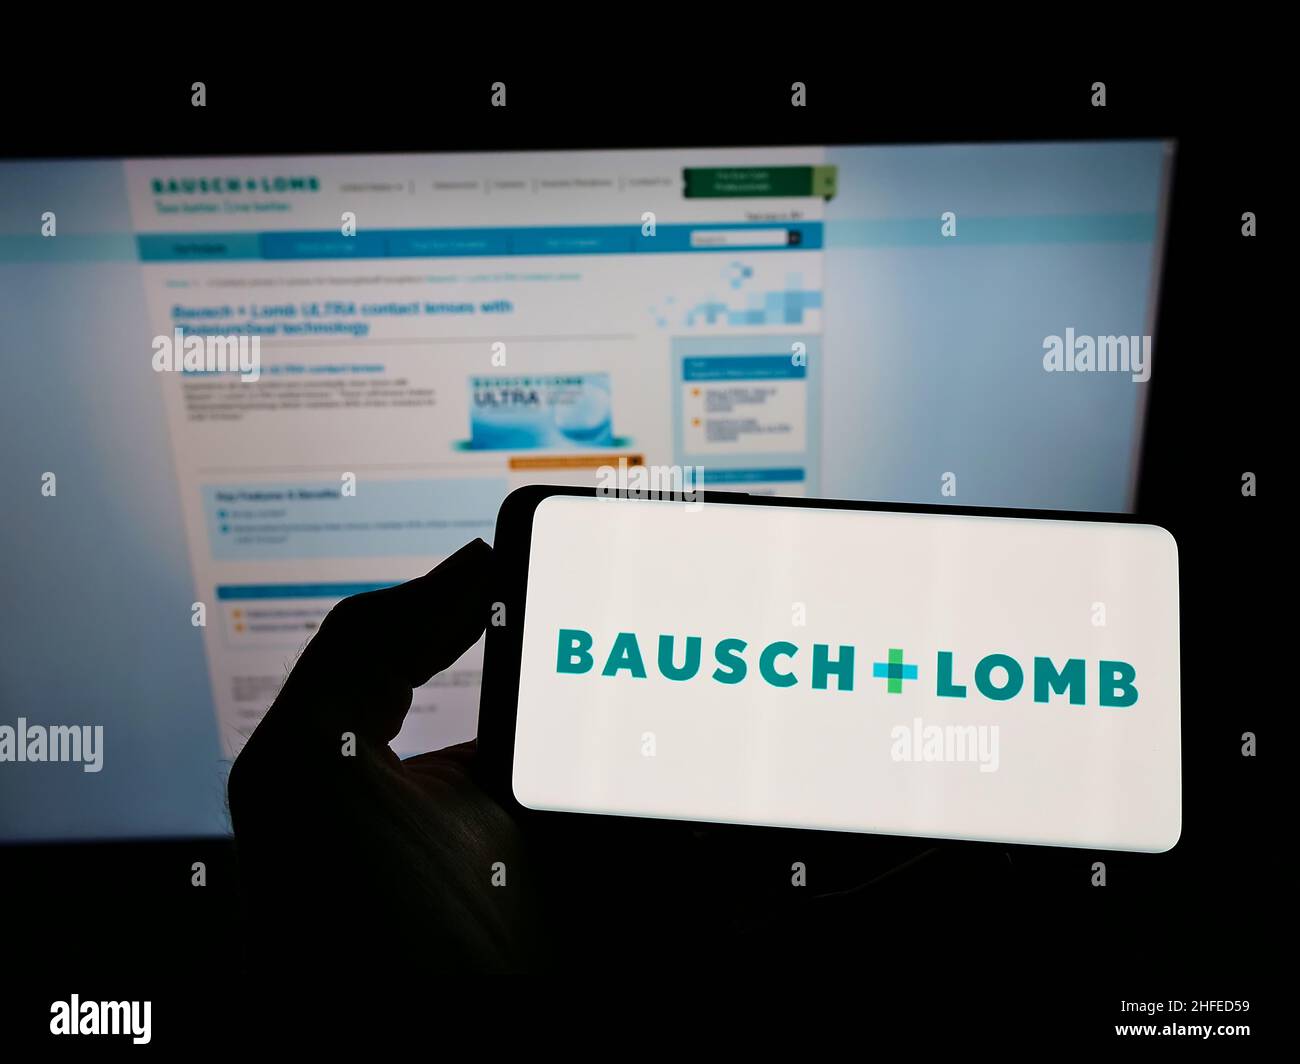 Person holding cellphone with logo of Canadian eye health company Bausch + Lomb on screen in front of business webpage. Focus on phone display. Stock Photo